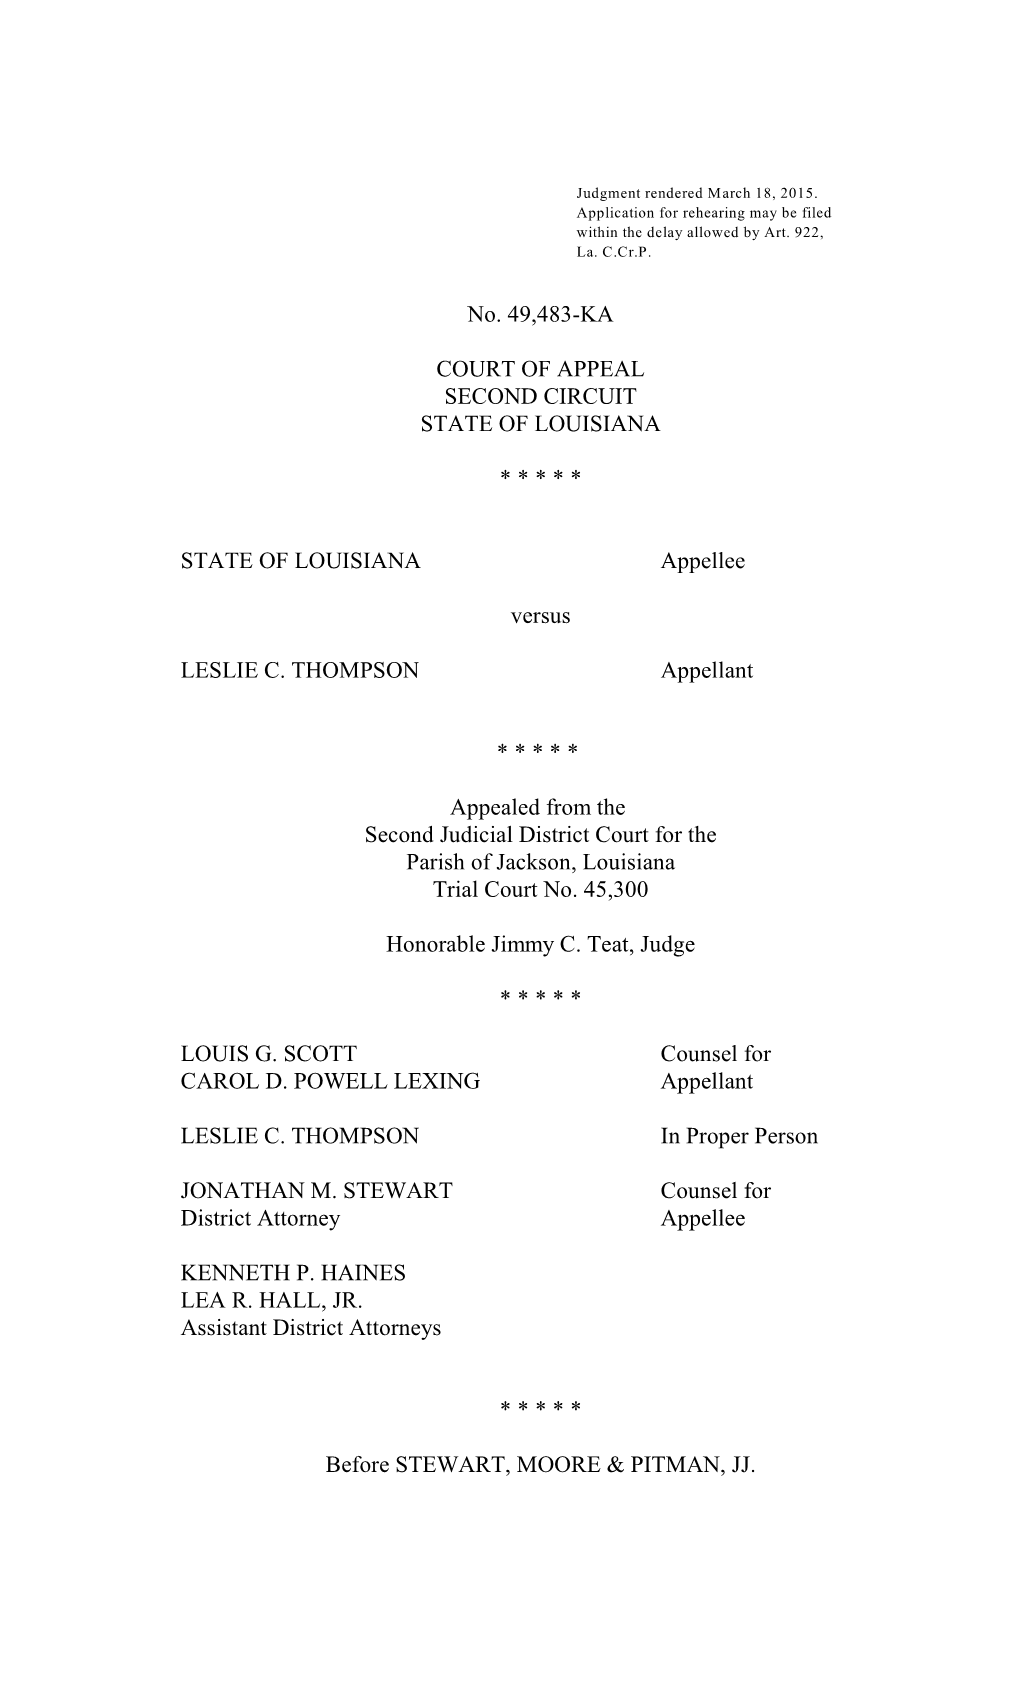 No. 49,483-KA COURT of APPEAL SECOND CIRCUIT STATE of LOUISIANA * * * * * STATE of LOUISIANA Appellee Versus LESLIE C. THOMPSON